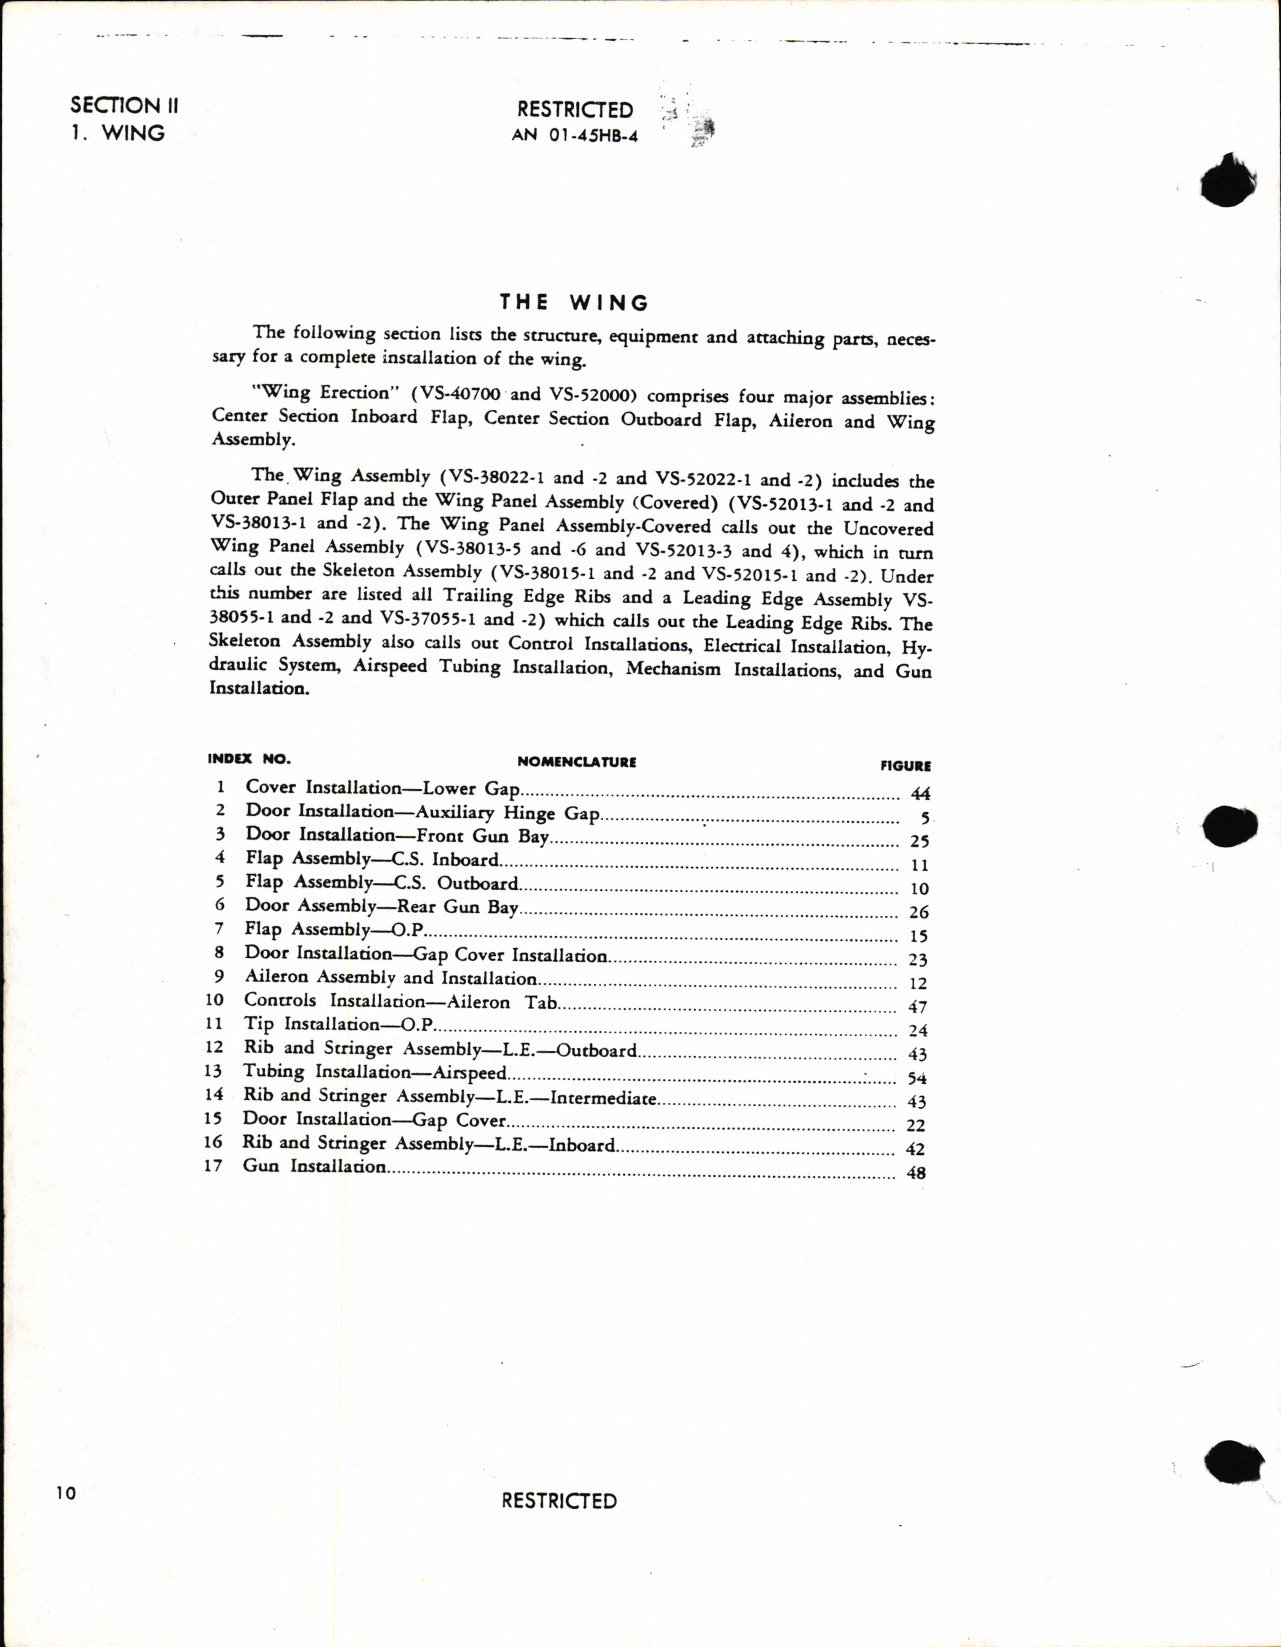 Sample page 18 from AirCorps Library document: Parts Catalog for F4U-4 and F4U-4B Airplanes